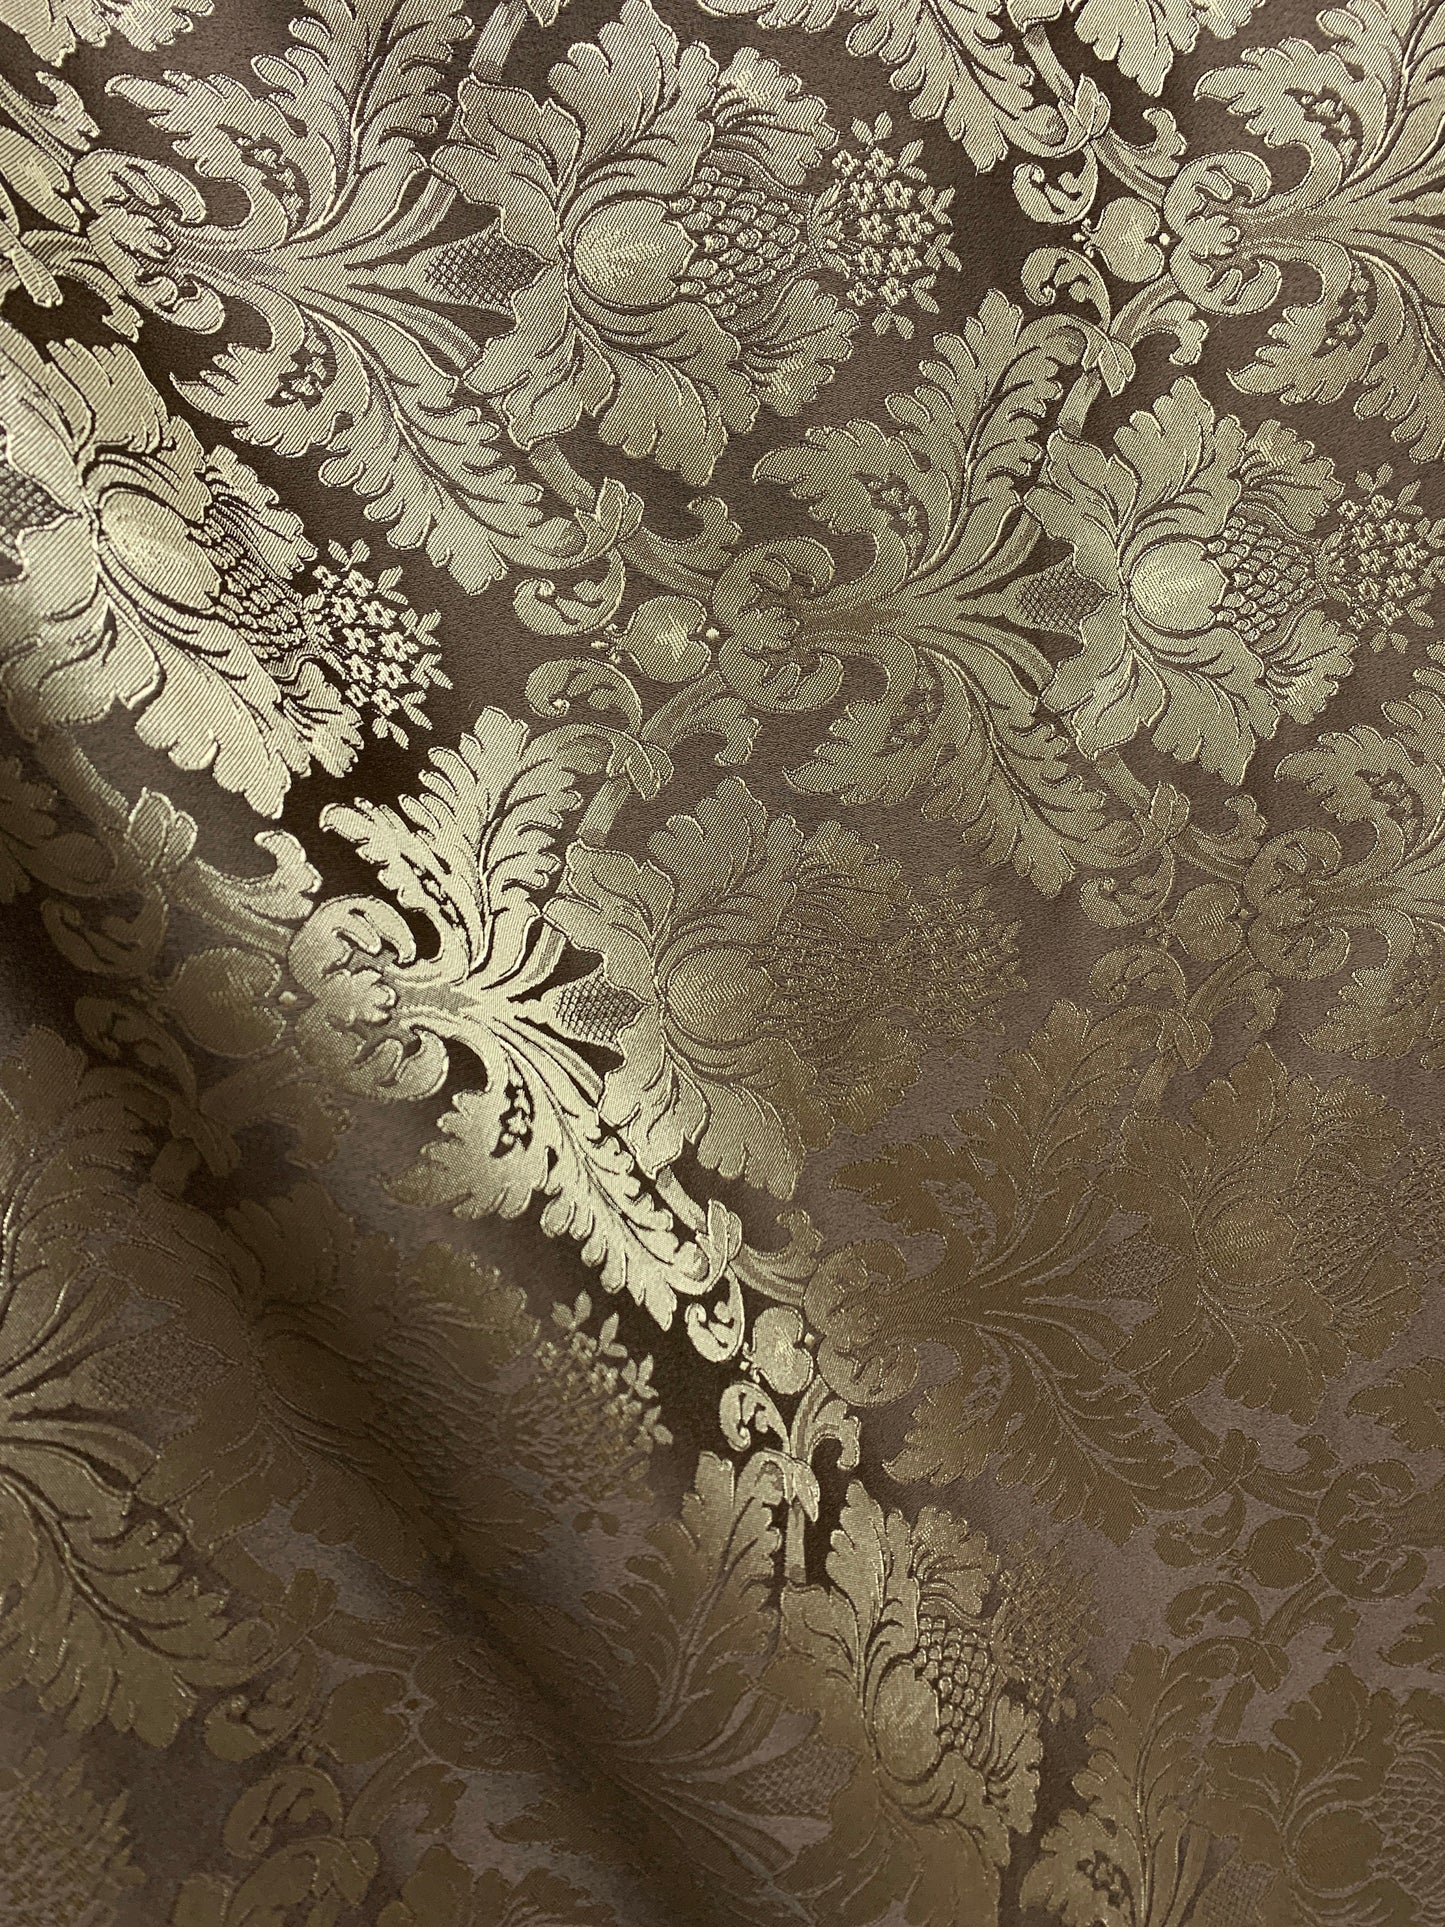 BROWN GOLD Damask Jacquard Brocade Flower Floral Fabric (110 in.) Sold By The Yard